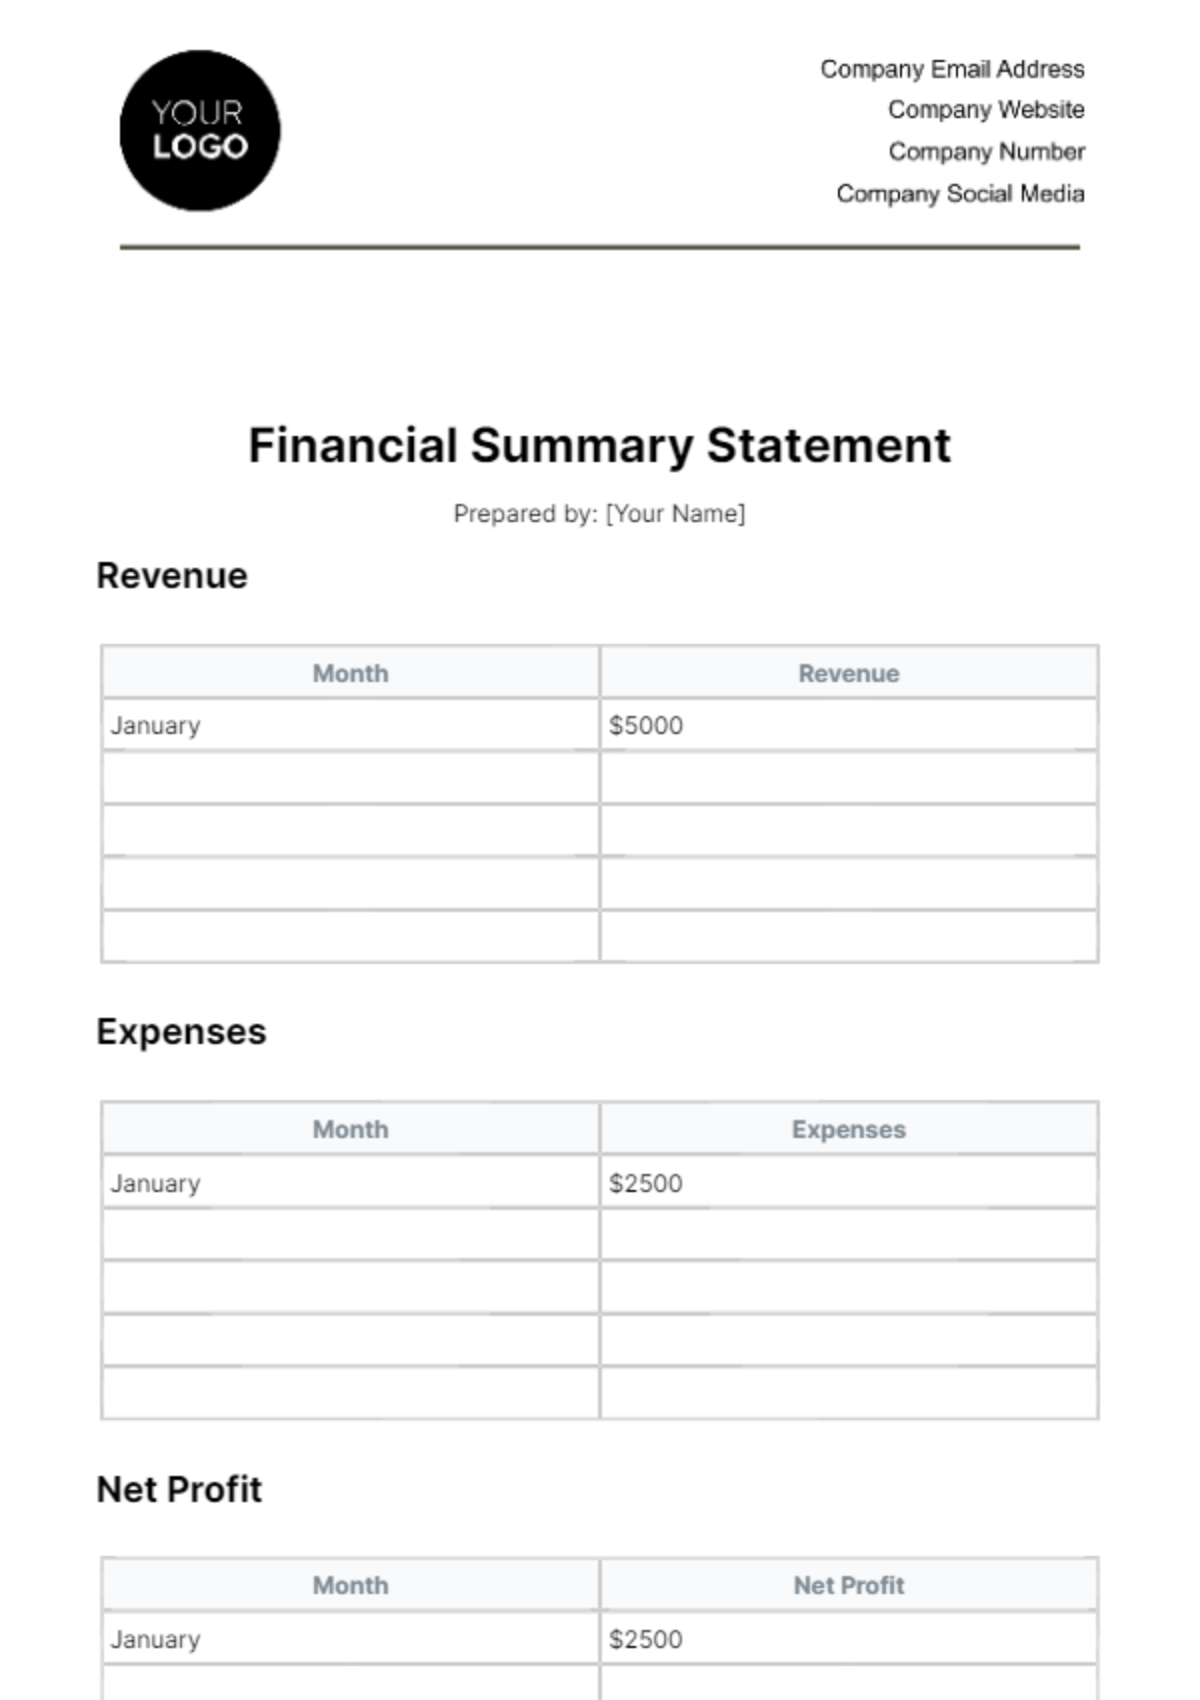 Free Financial Summary Statement Template